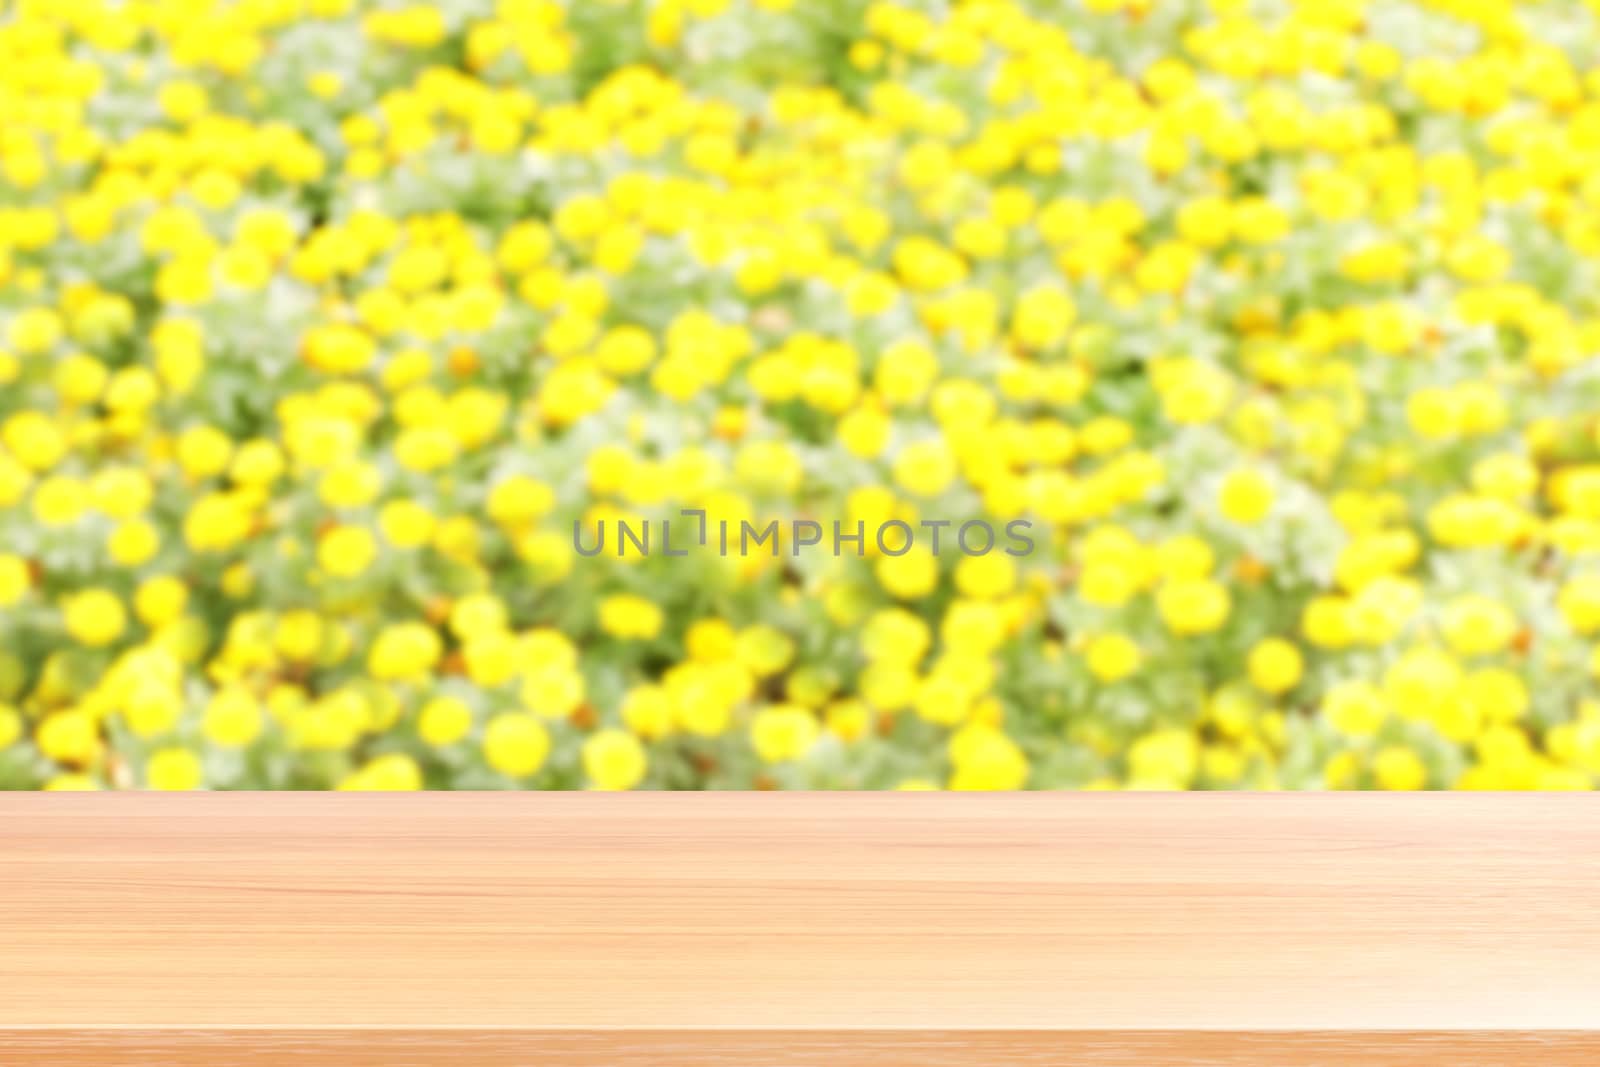 wood plank on blurred flower yellow soft background, empty wood table floors on blurred flower yellow soft garden nature background, wood table board empty for mock up display products